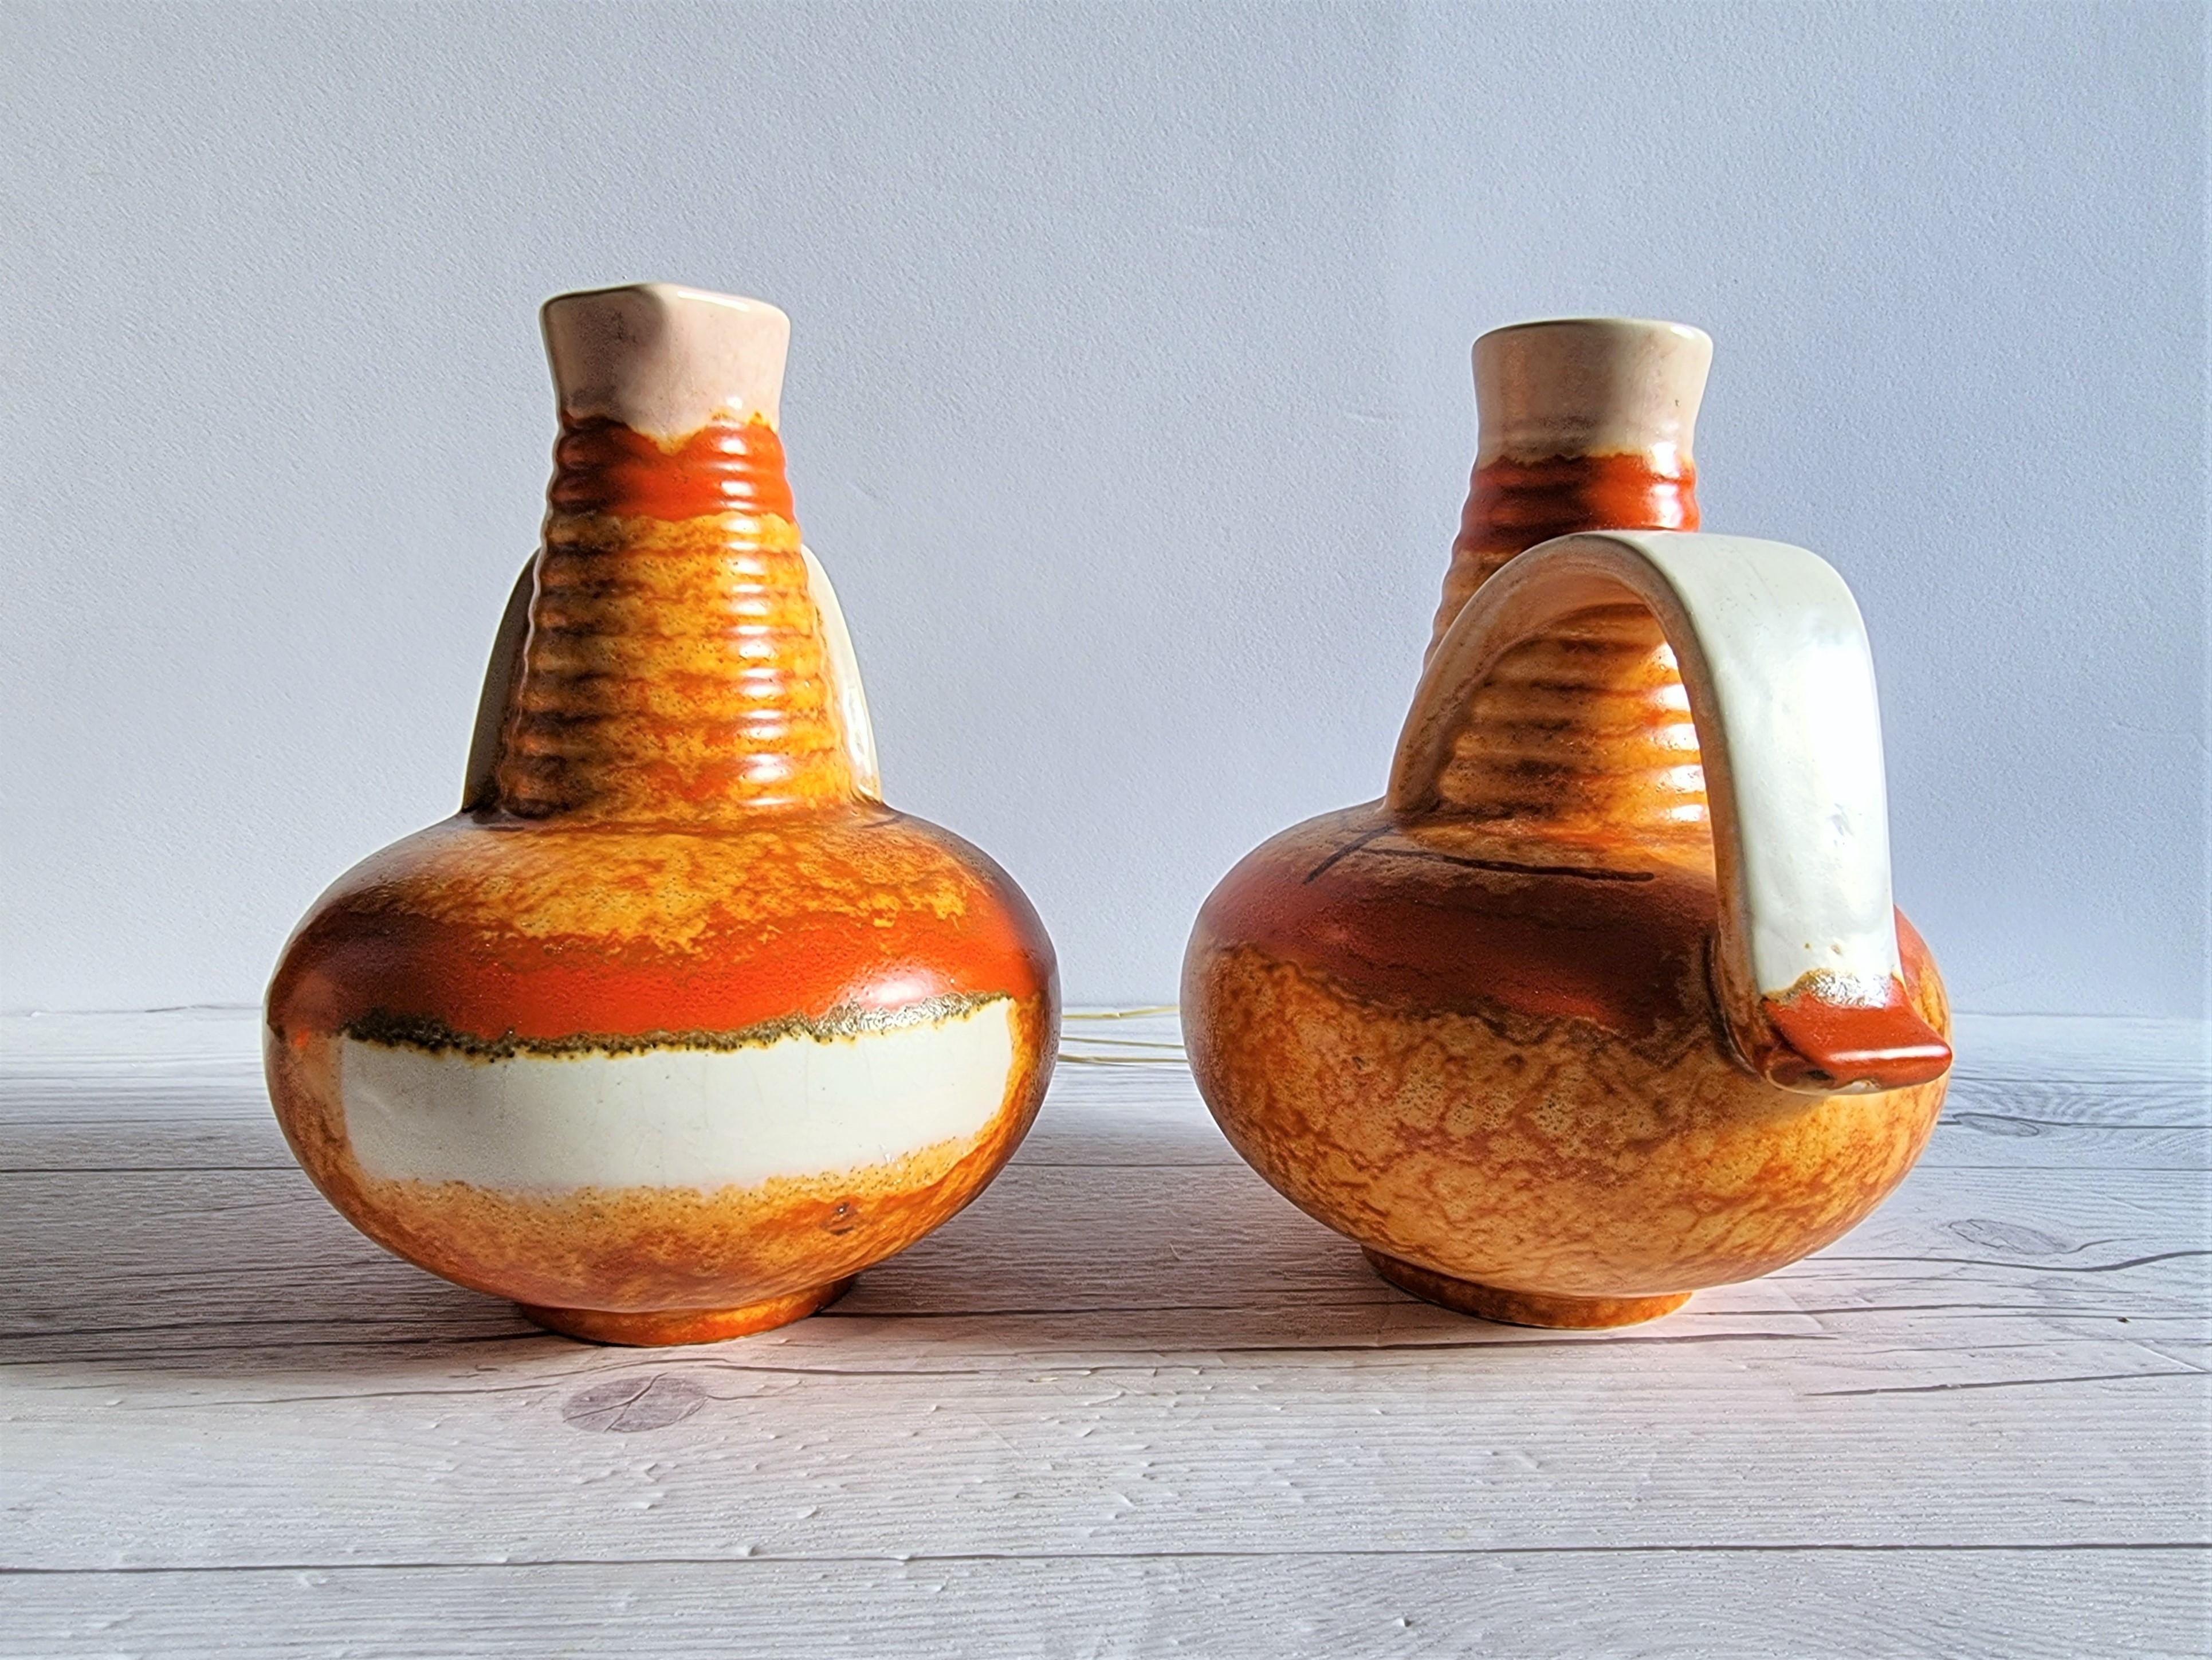 This stunning duo of 1930s Bauhaus Art Deco design is by Carstens Uffrecht Pottery and attributed to the lead designer Hildegard Delius (b. 1896 - d. 1955). 
The forms of the vases physically displays the geometric Bauhaus influence throughout,